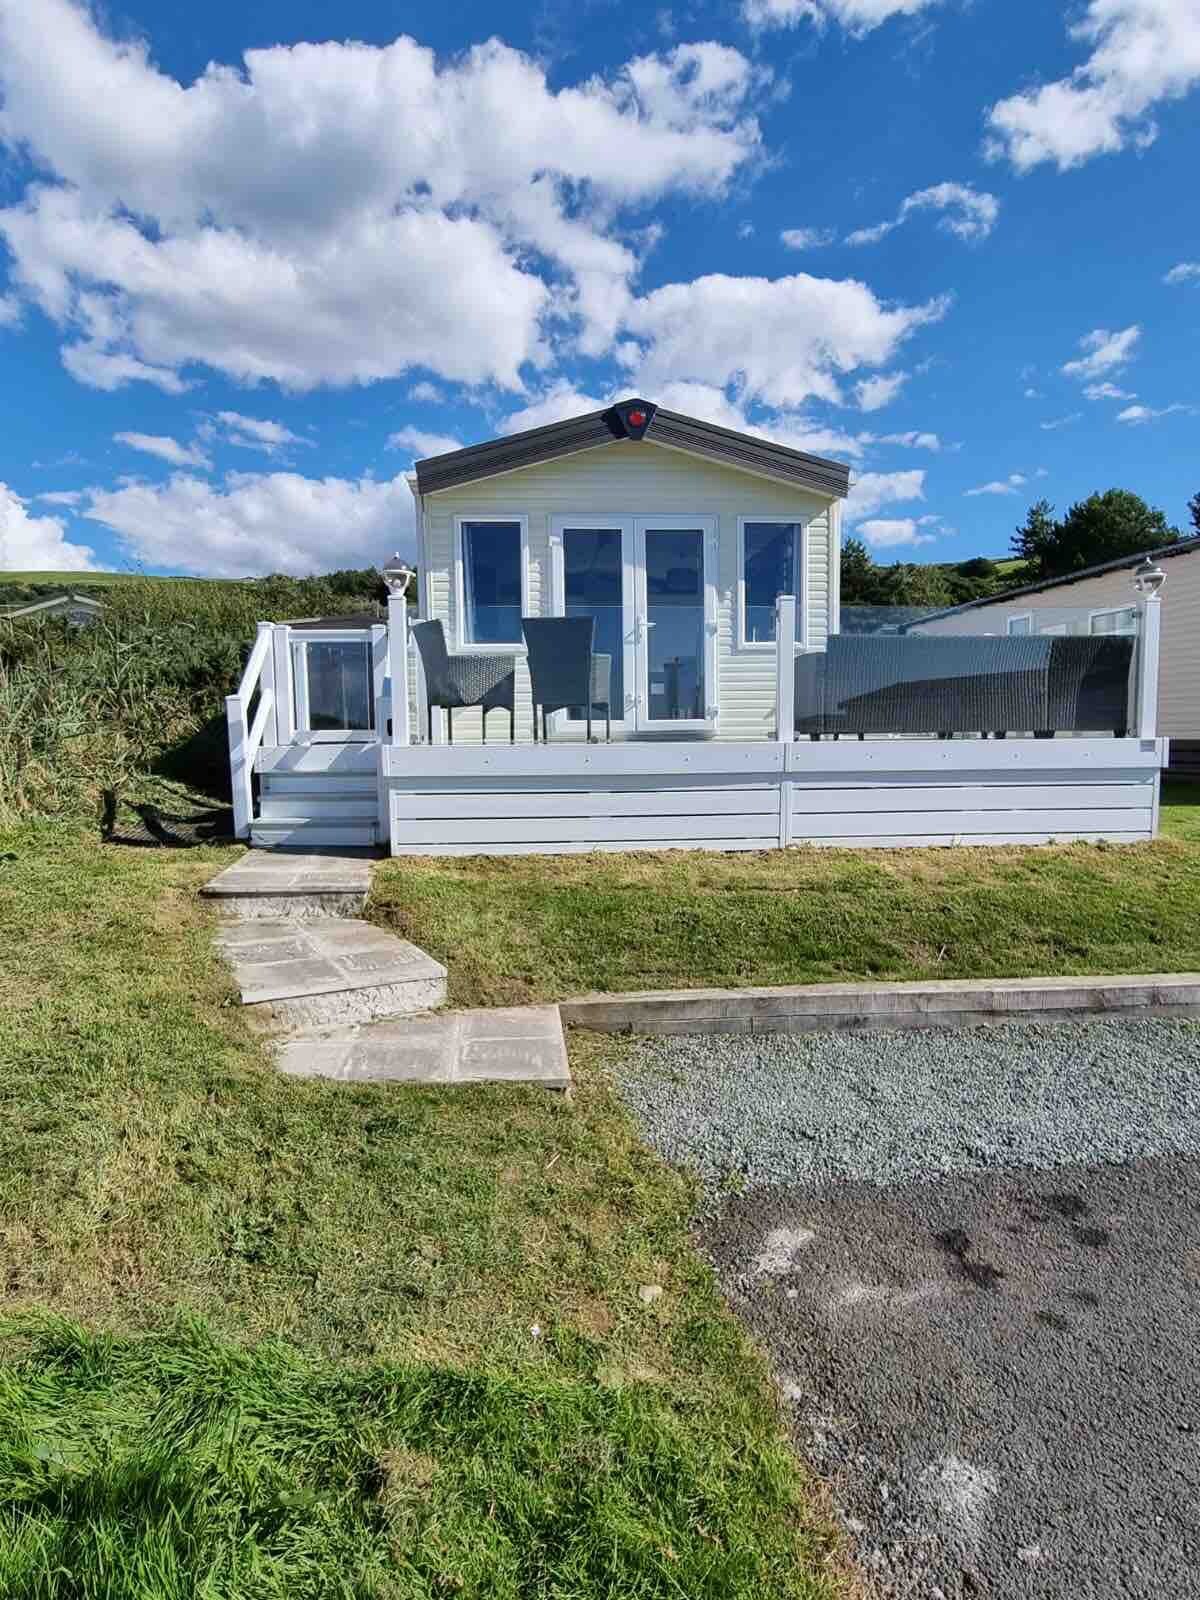 Delightful 3-Bed Holiday Home On The Welsh Coast